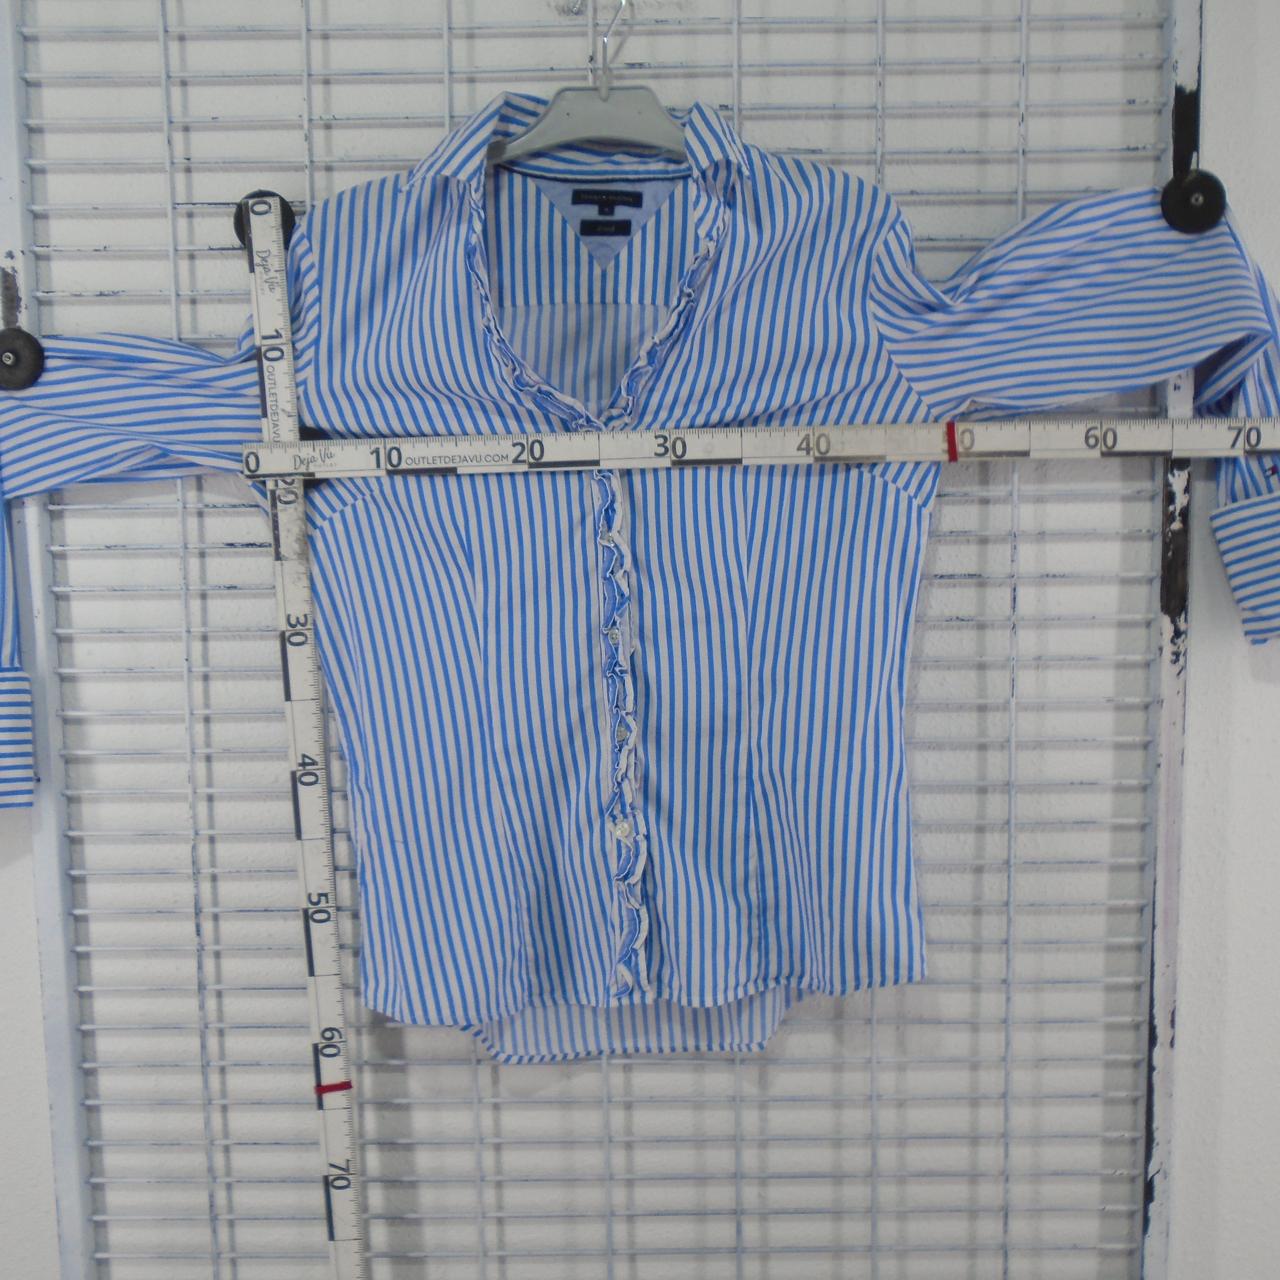 Women's Shirt Tommy Hilfiger. Blue. S. Used. Good